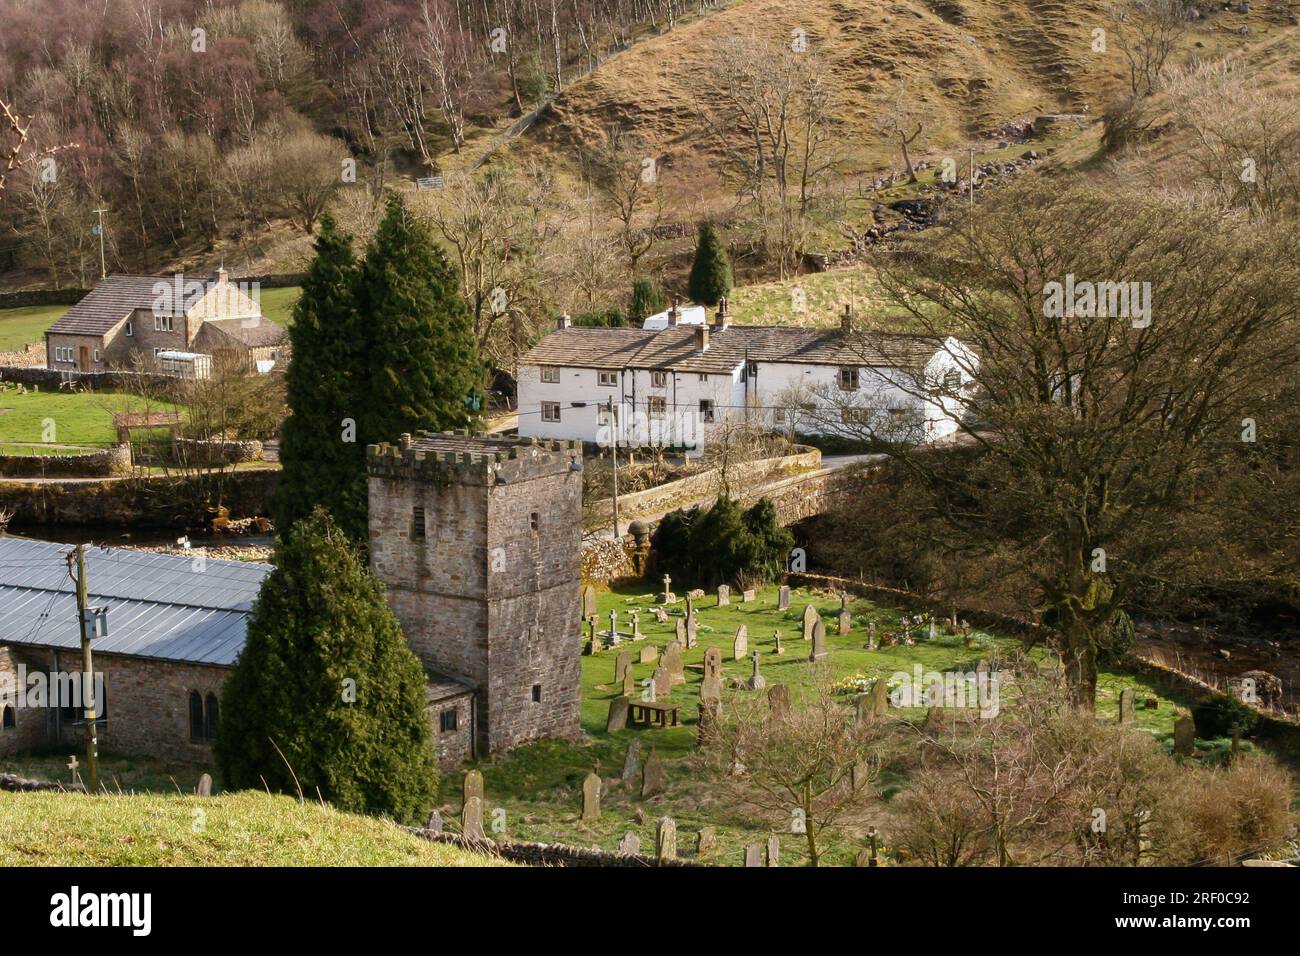 Looking down onto St Michael and All Angels Church and the George Inn in Hubberholme in Langstrothdale, North Yorkshire. Stock Photo